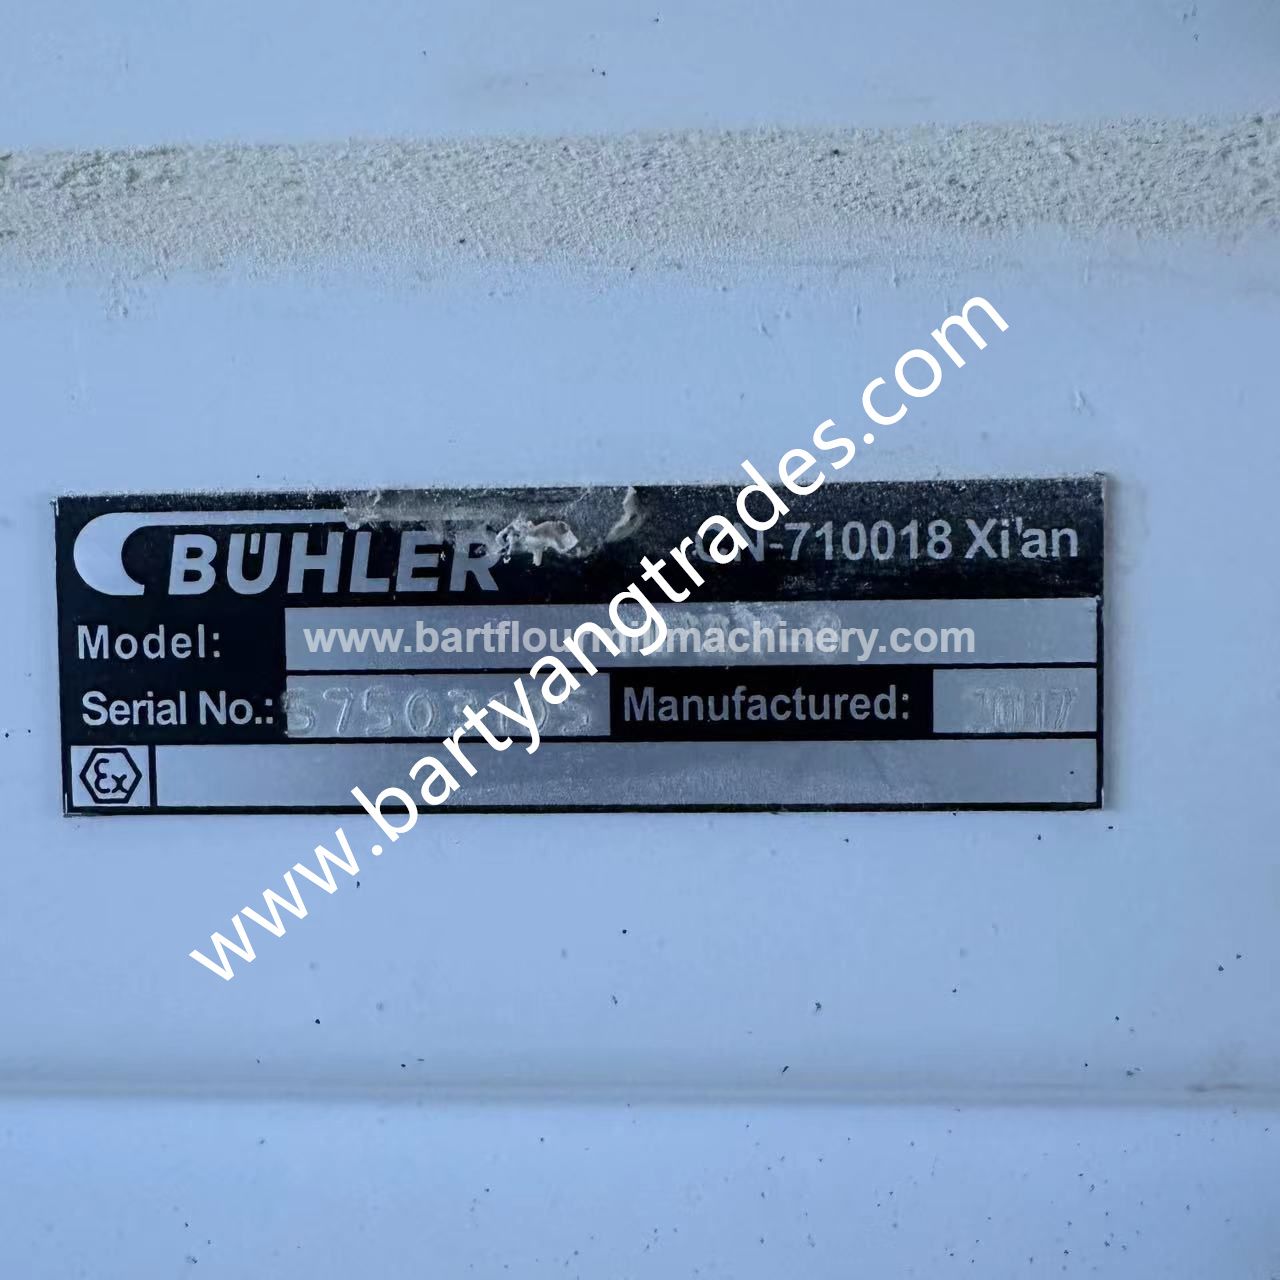 Used Buhler Plansifter manufactured in 1997&2017